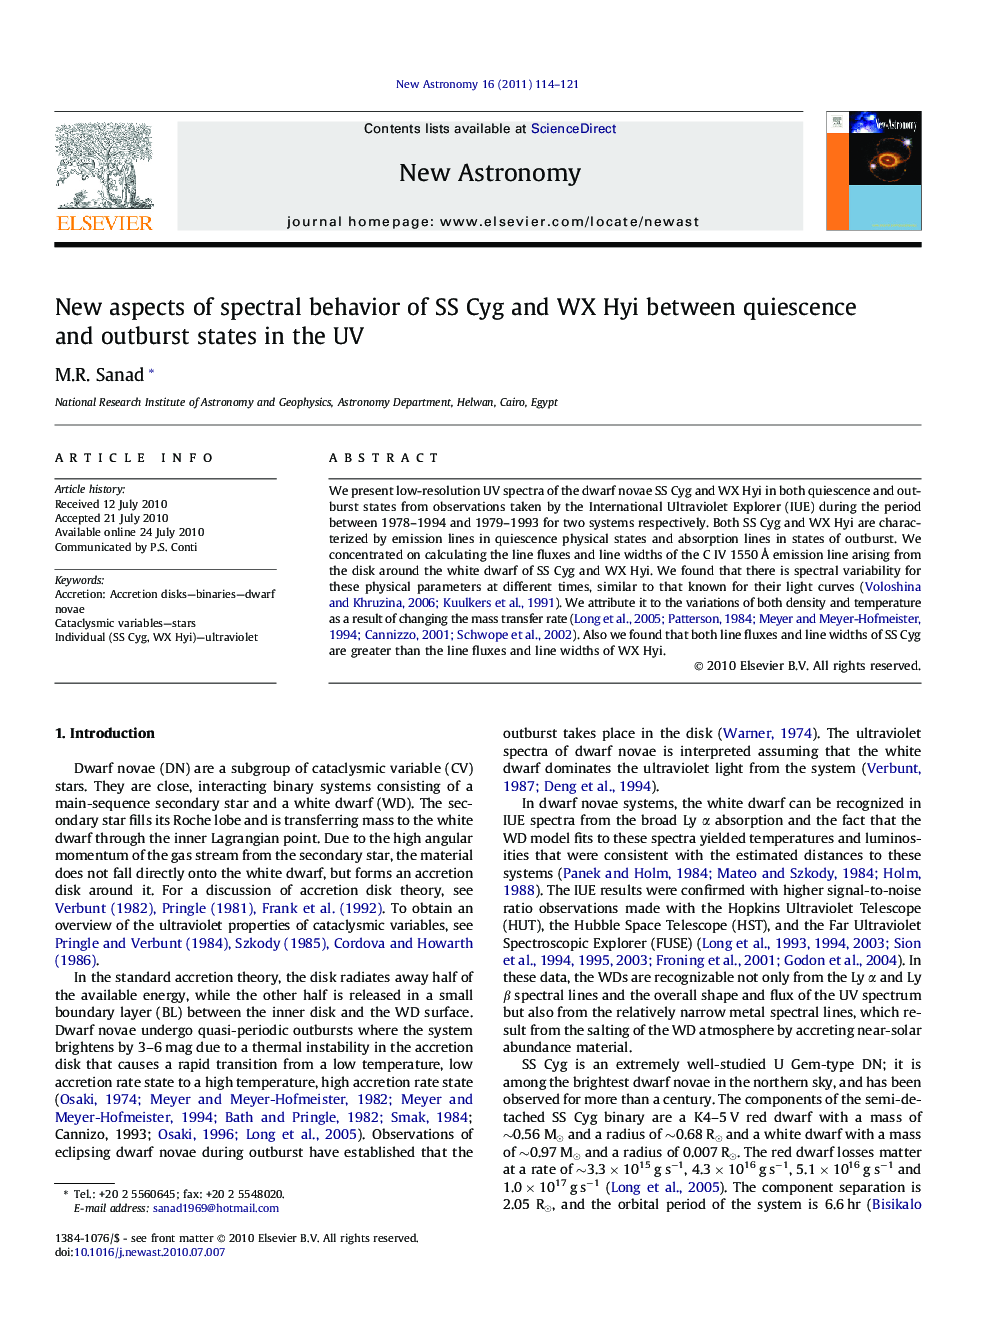 New aspects of spectral behavior of SS Cyg and WX Hyi between quiescence and outburst states in the UV